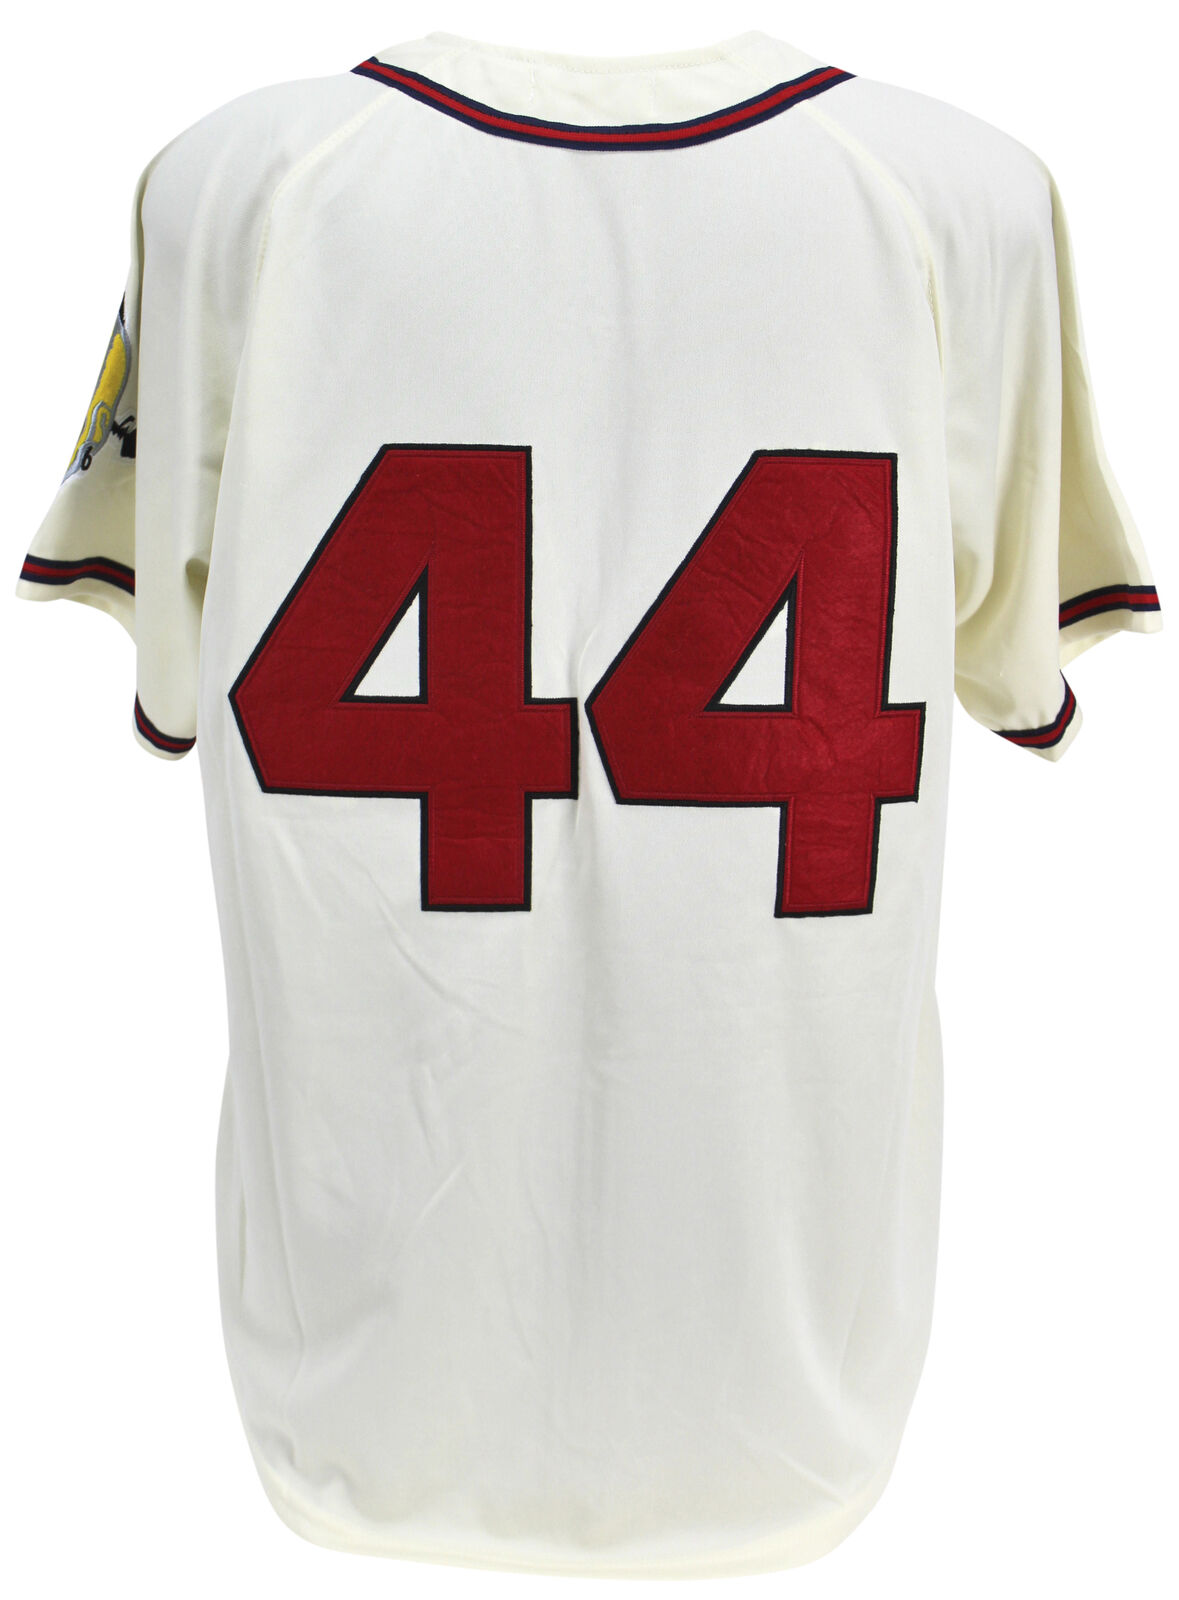 Hank Aaron Atlanta Braves Fanatics Authentic Autographed Mitchell and Ness  1974 Authentic Jersey